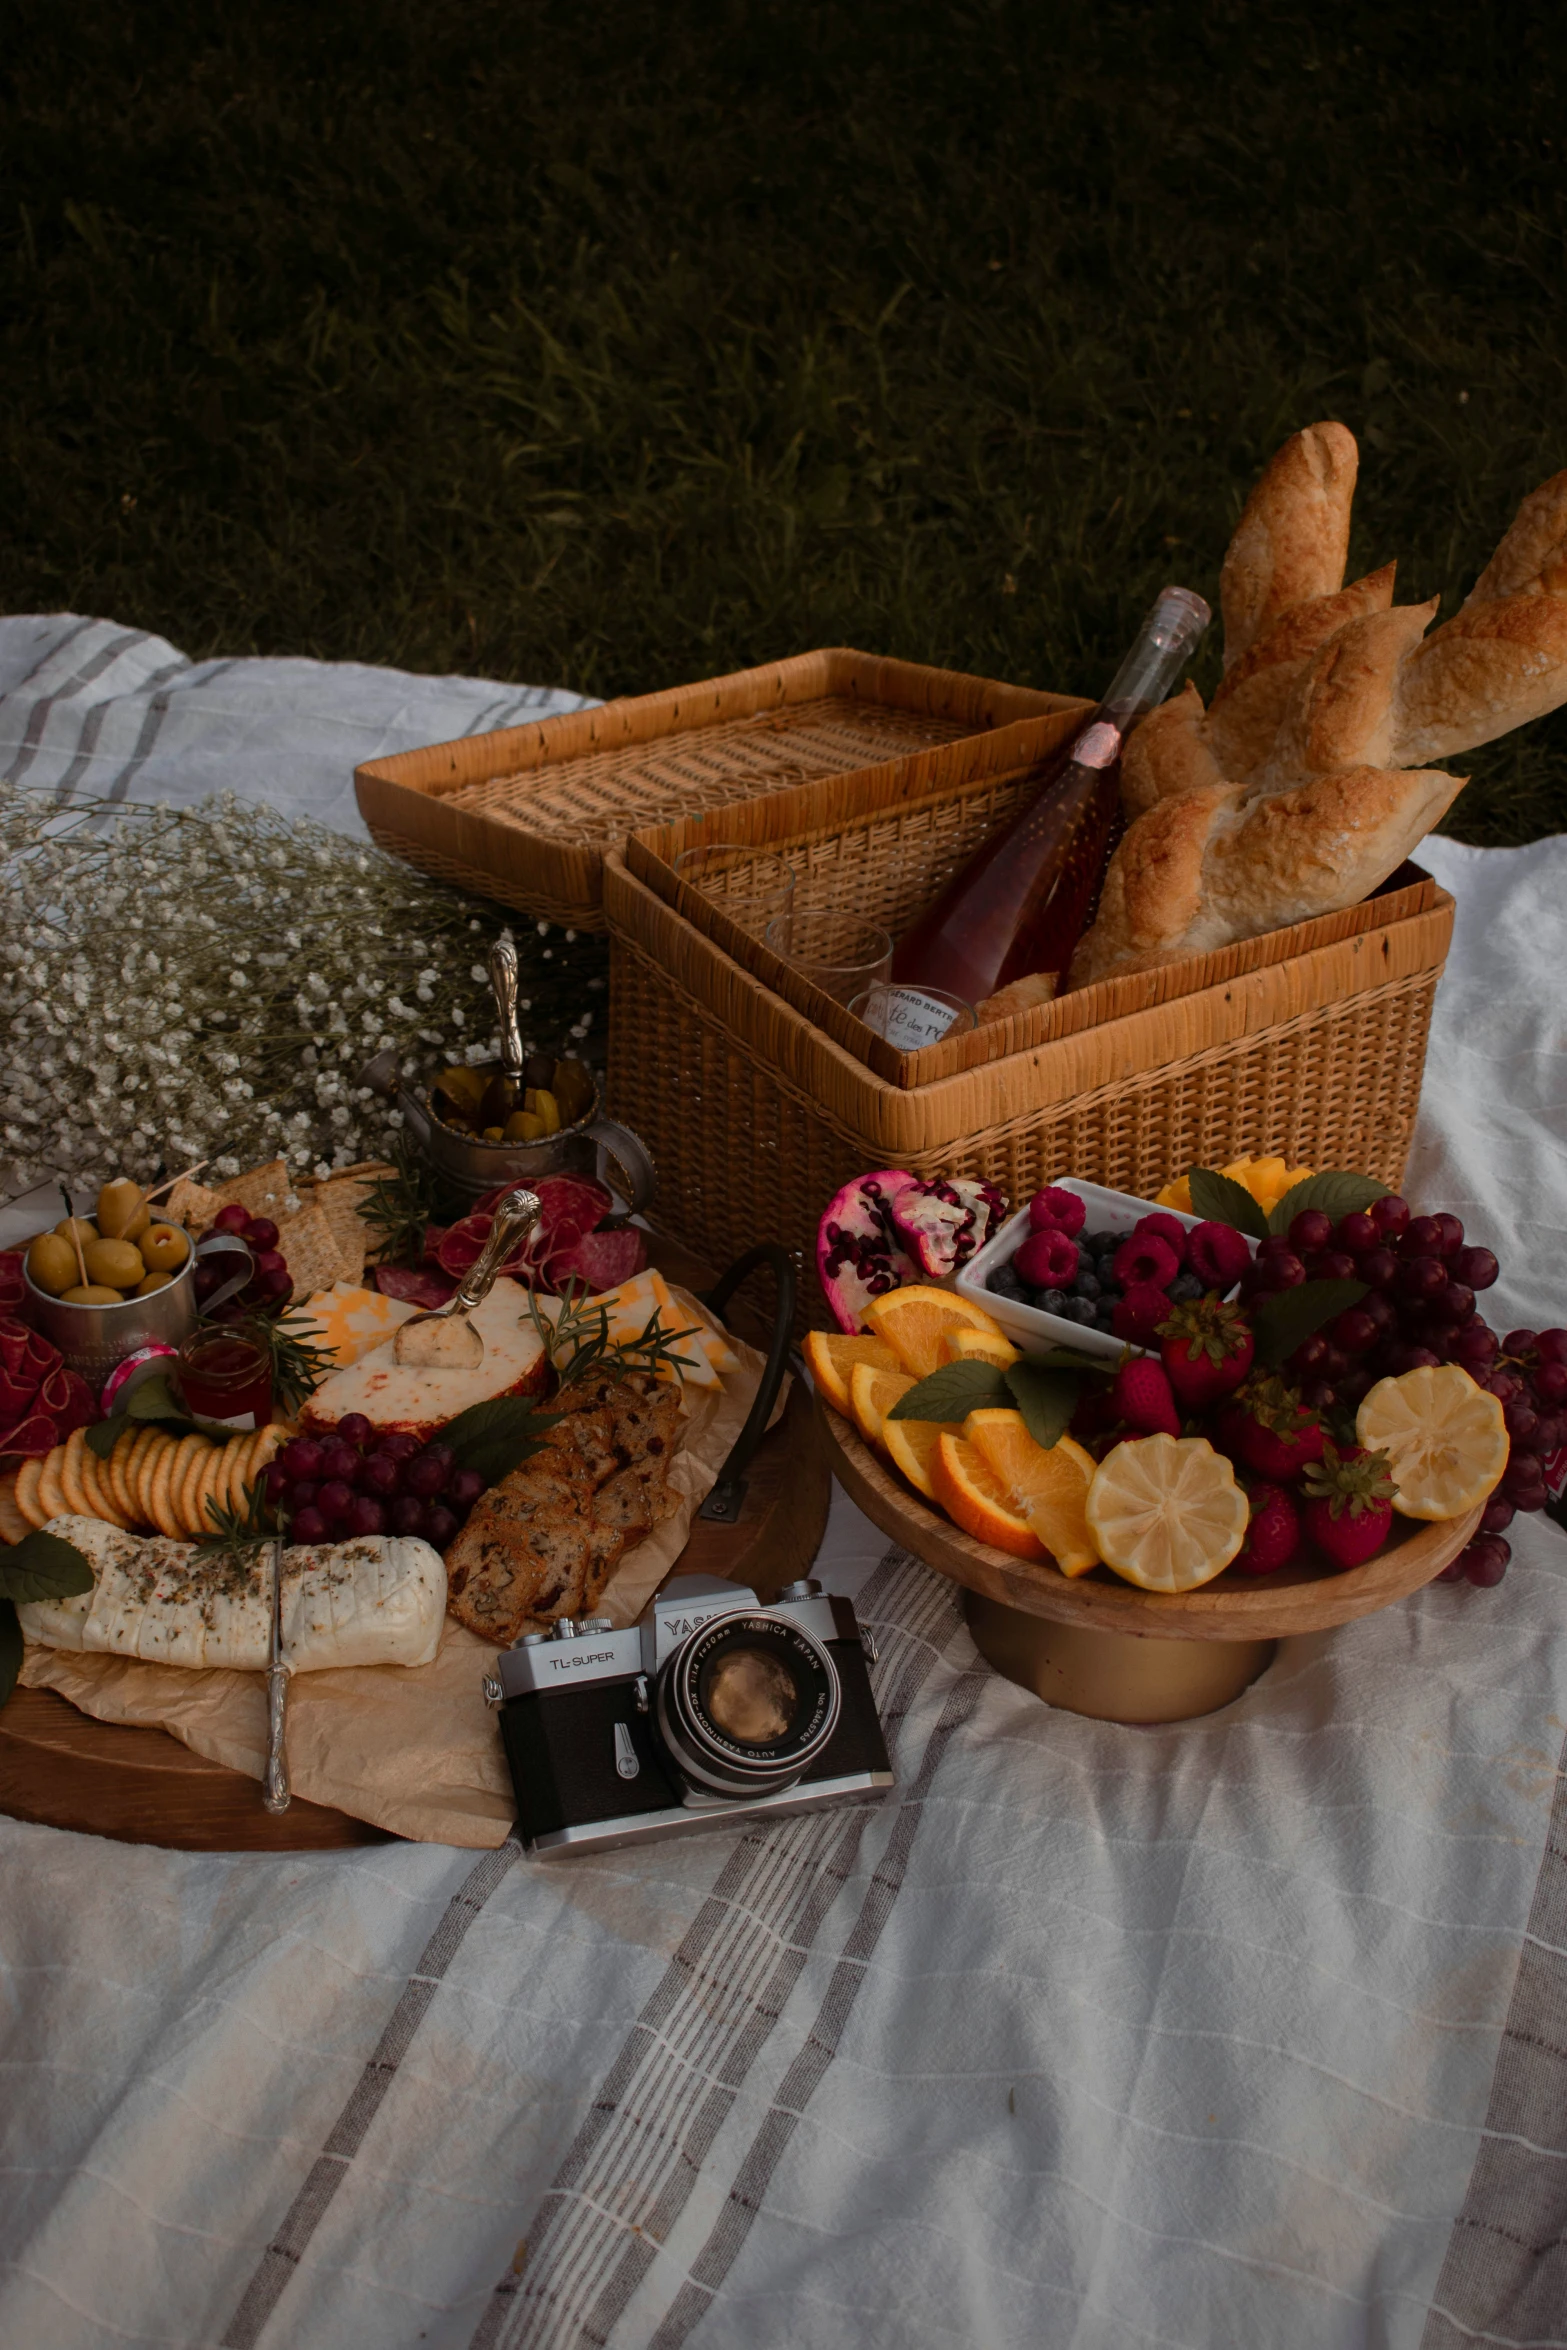 a picnic basket with bread, ers, fruit, and cheese